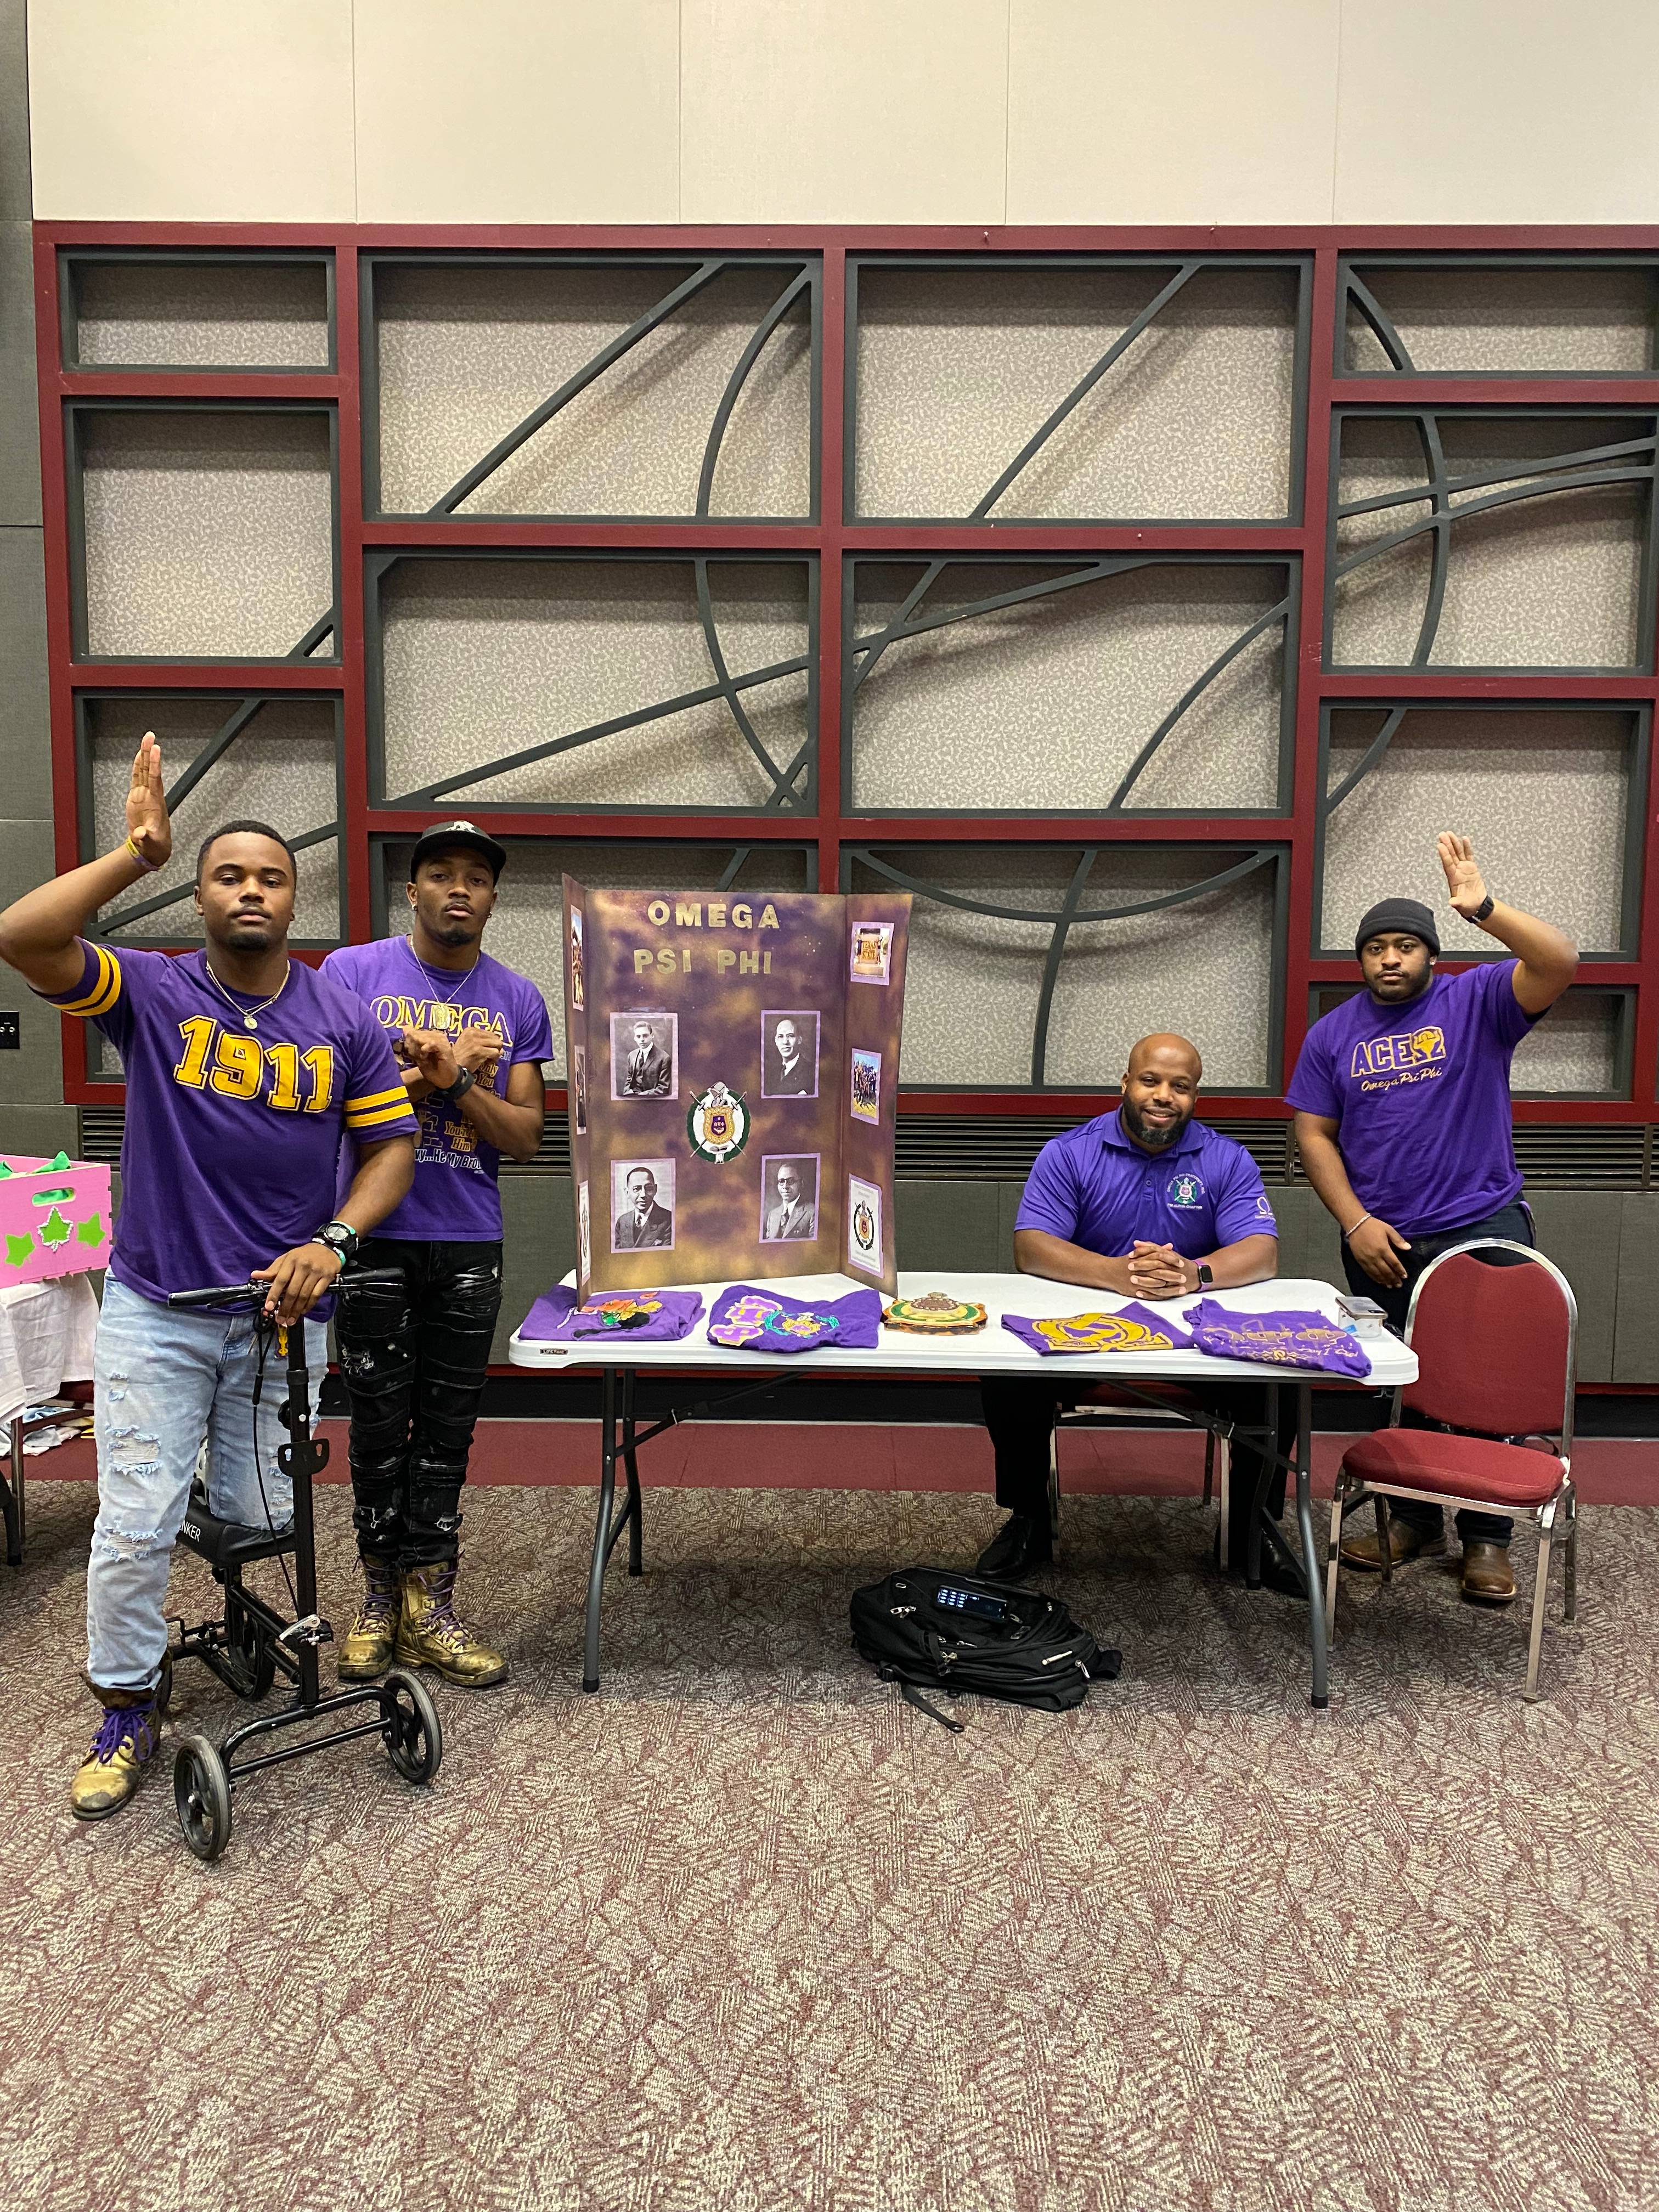 Men of Omega Psi Phi wearing their organization's colors and showing their hand signs while tabling in the LBJ Student Center Ballroom